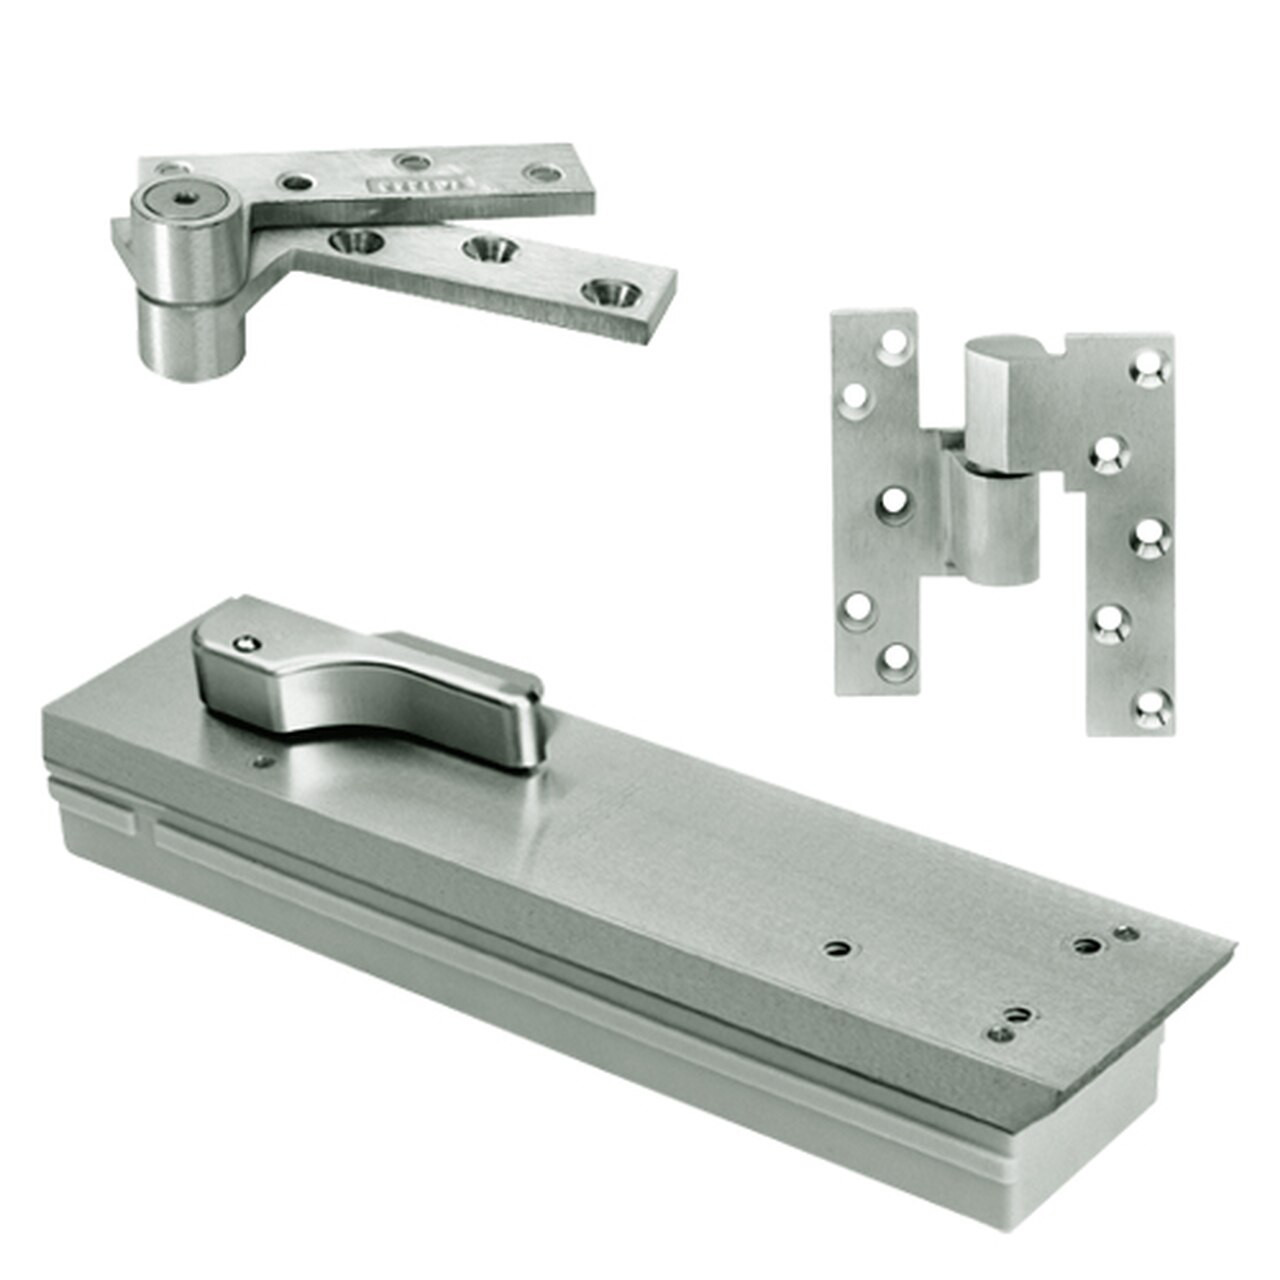 FQ5105NBC-LFP-LCC-LH-619 Rixson Q51 Series Fire Rated 3/4" Offset Hung Shallow Depth Floor Closers in Satin Nickel Finish